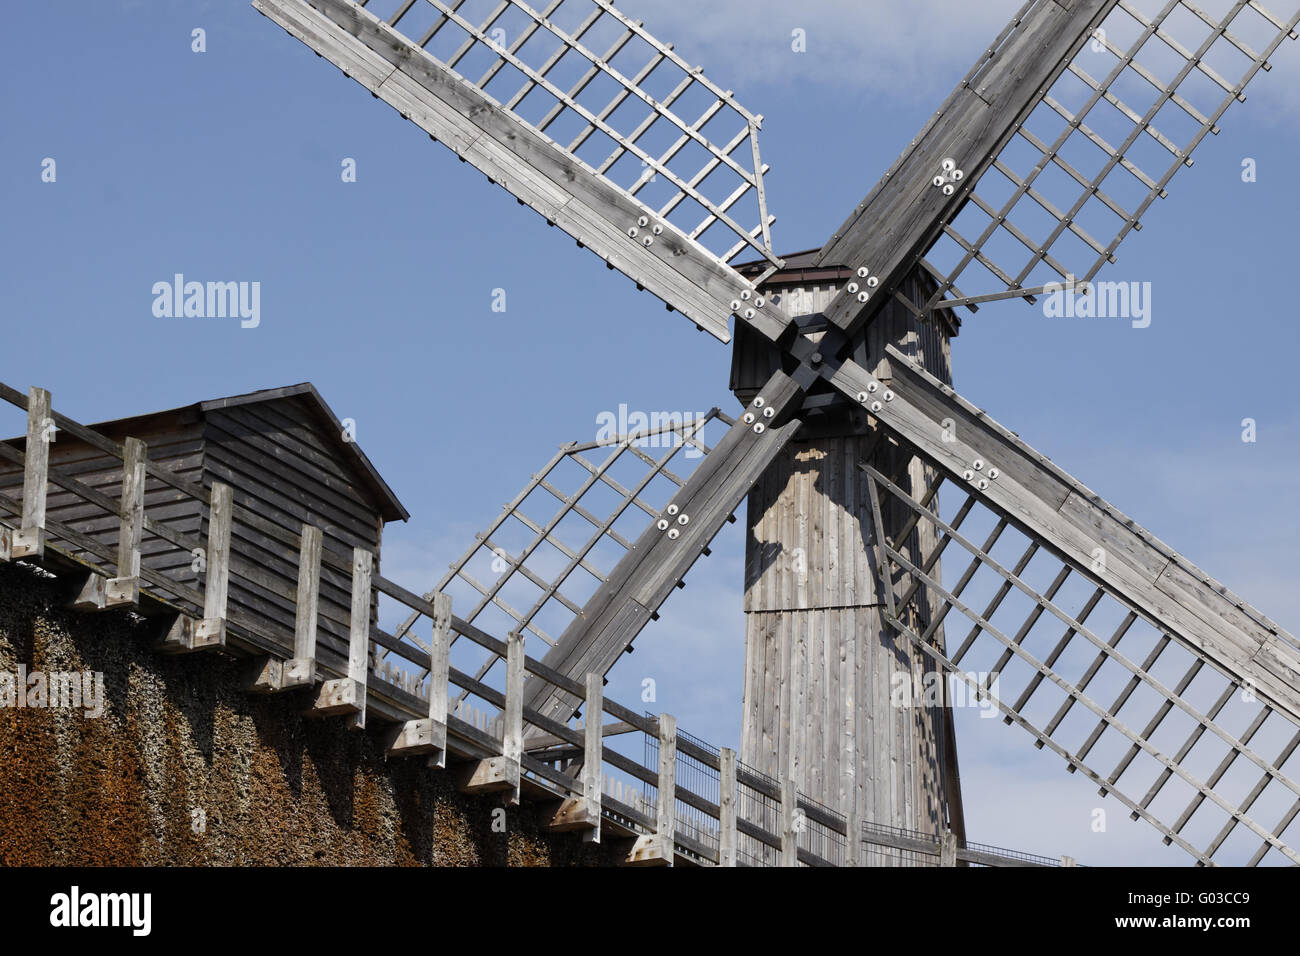 Bad Rothenfelde, salt-works with mill, Germany Stock Photo